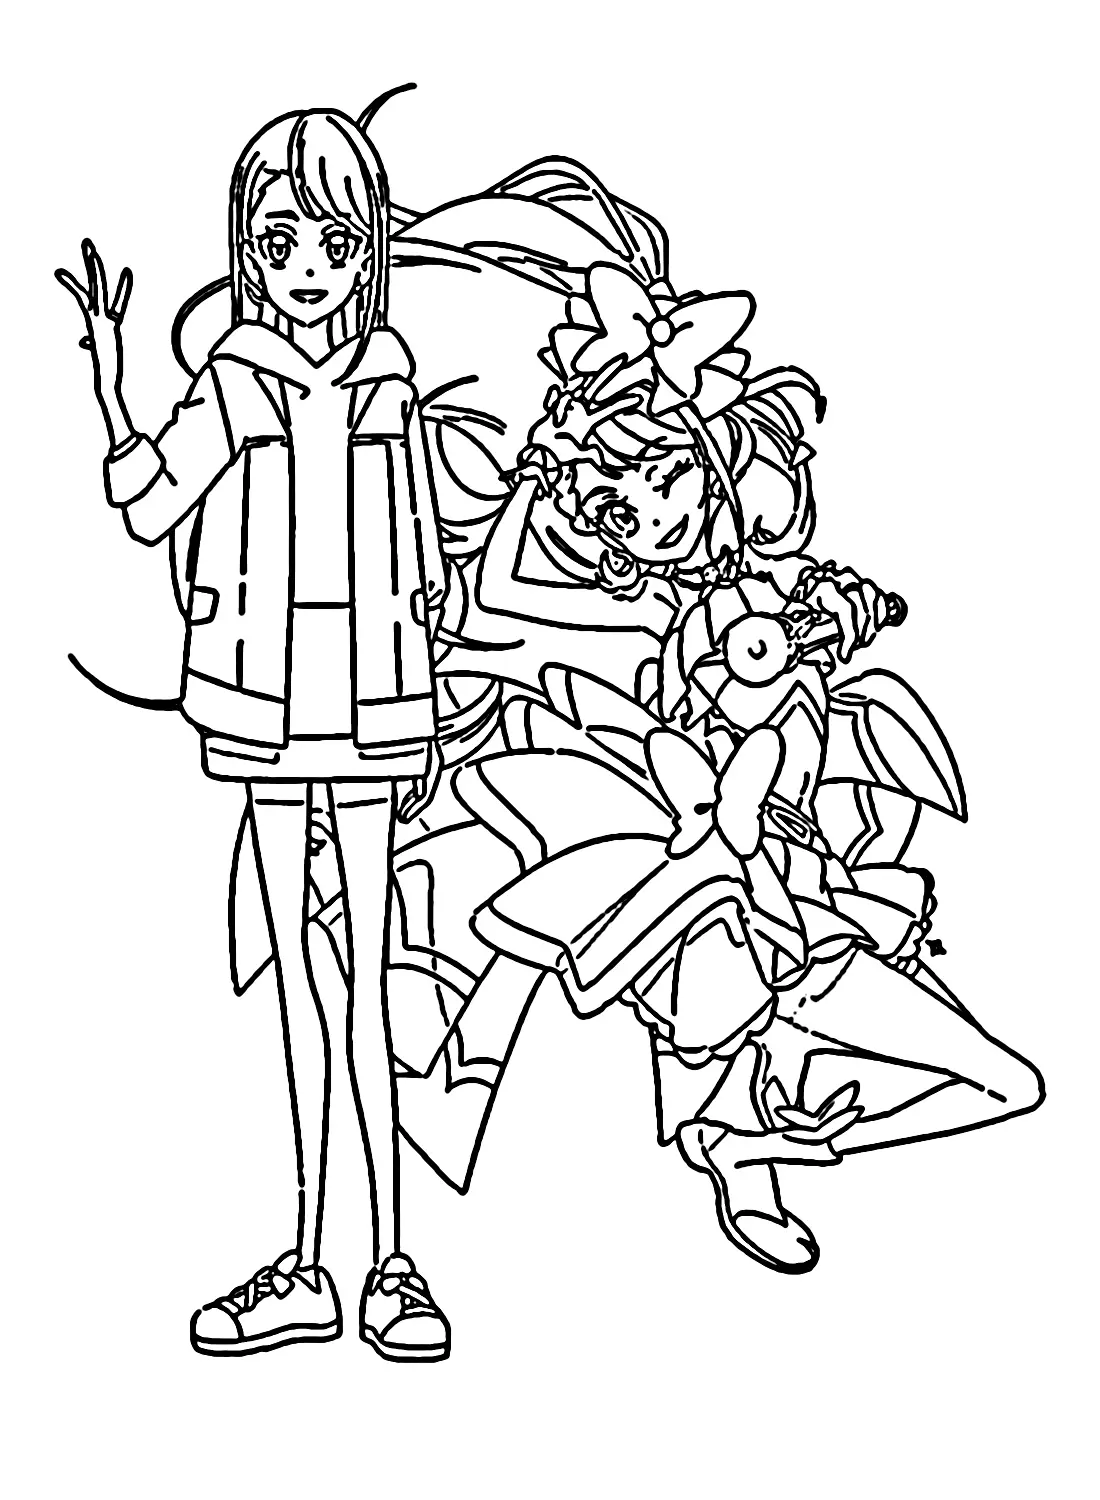 Delicious Party Pretty Cure Coloring Pages